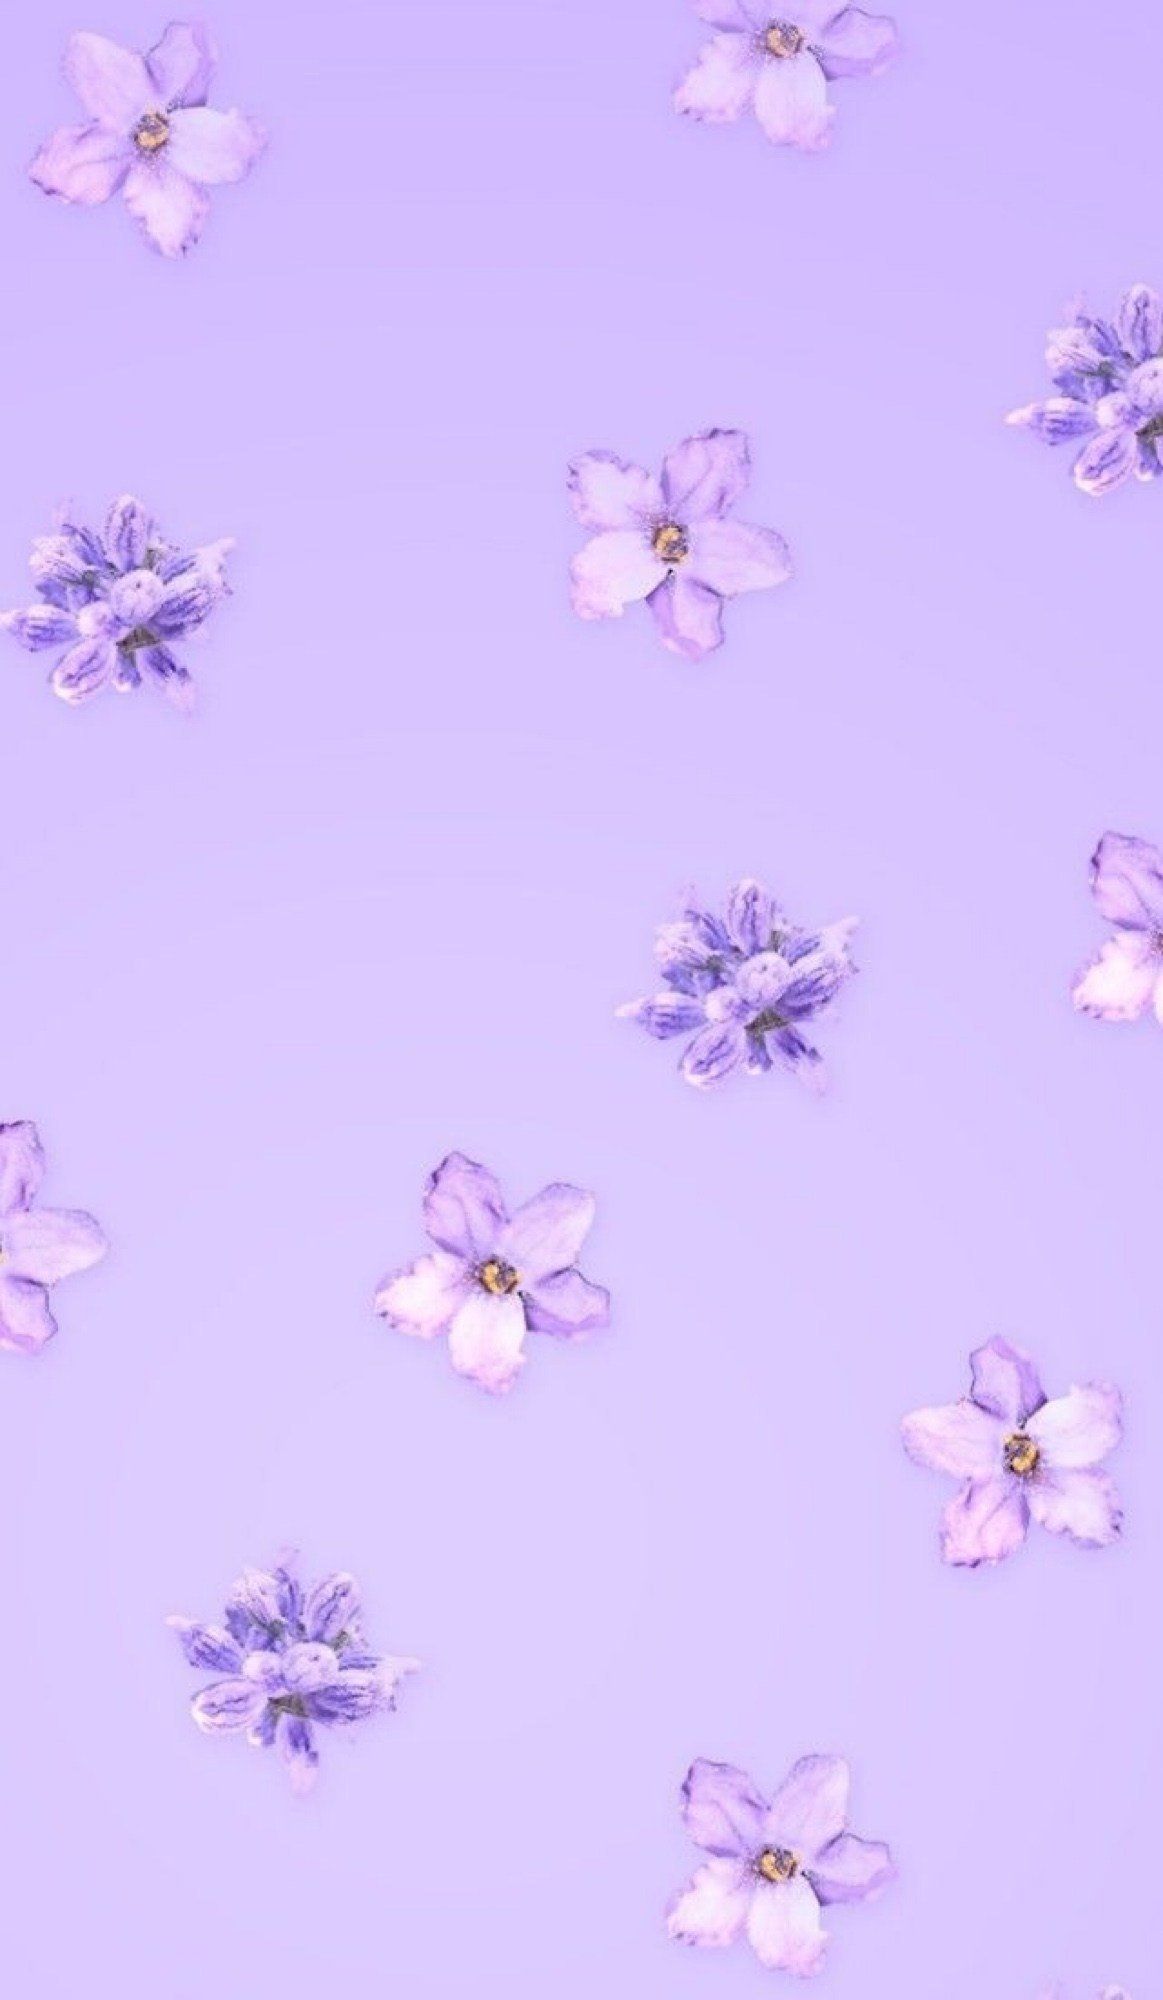 Purple background with purple flowers in the middle, aesthetic backgrounds - Pastel purple